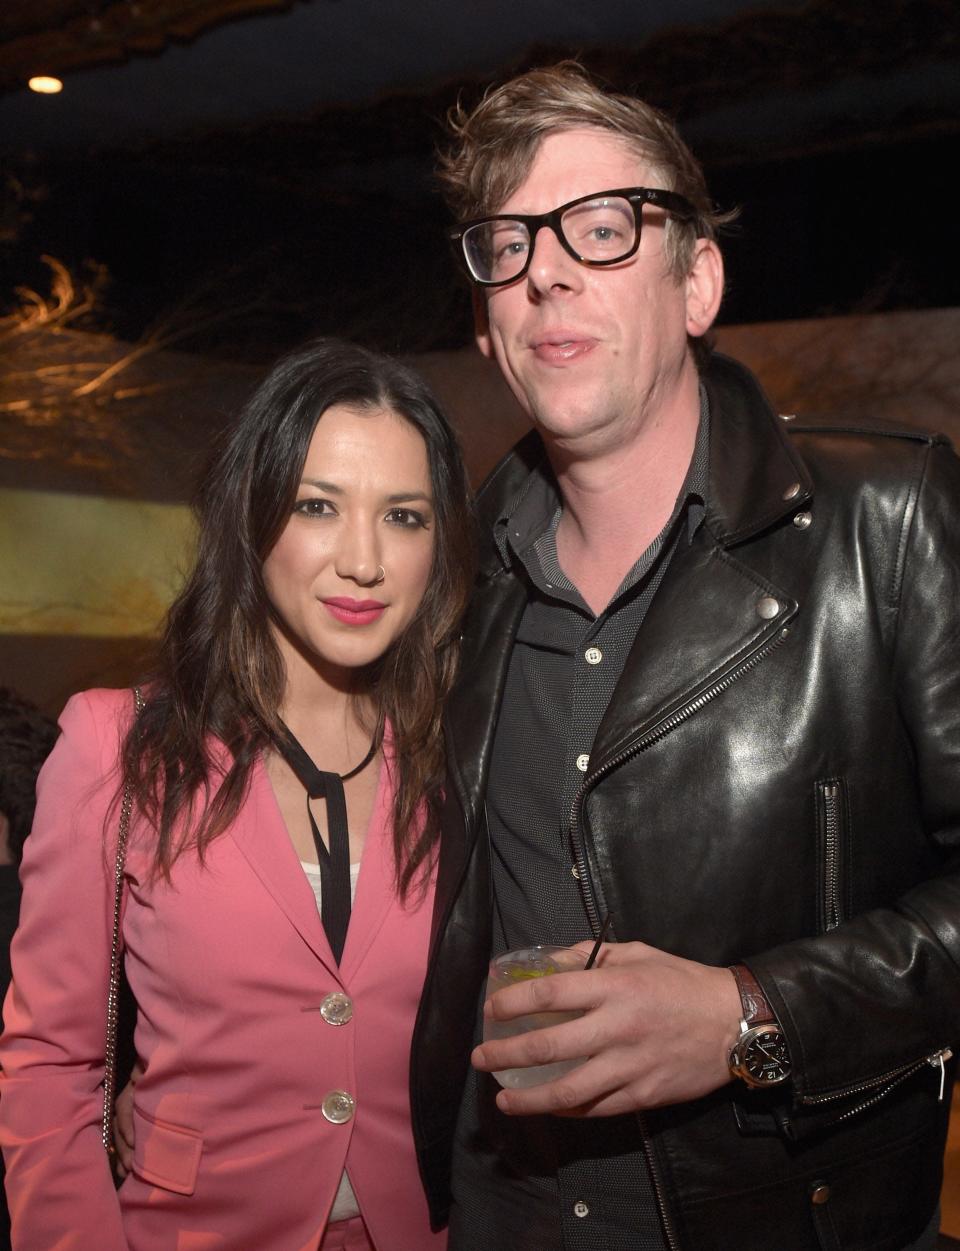 Michelle Branch,&nbsp;39,&nbsp;citied irreconcilable differences in the divorce filing from her husband of three years, Black Keys drummer Patrick Carney.